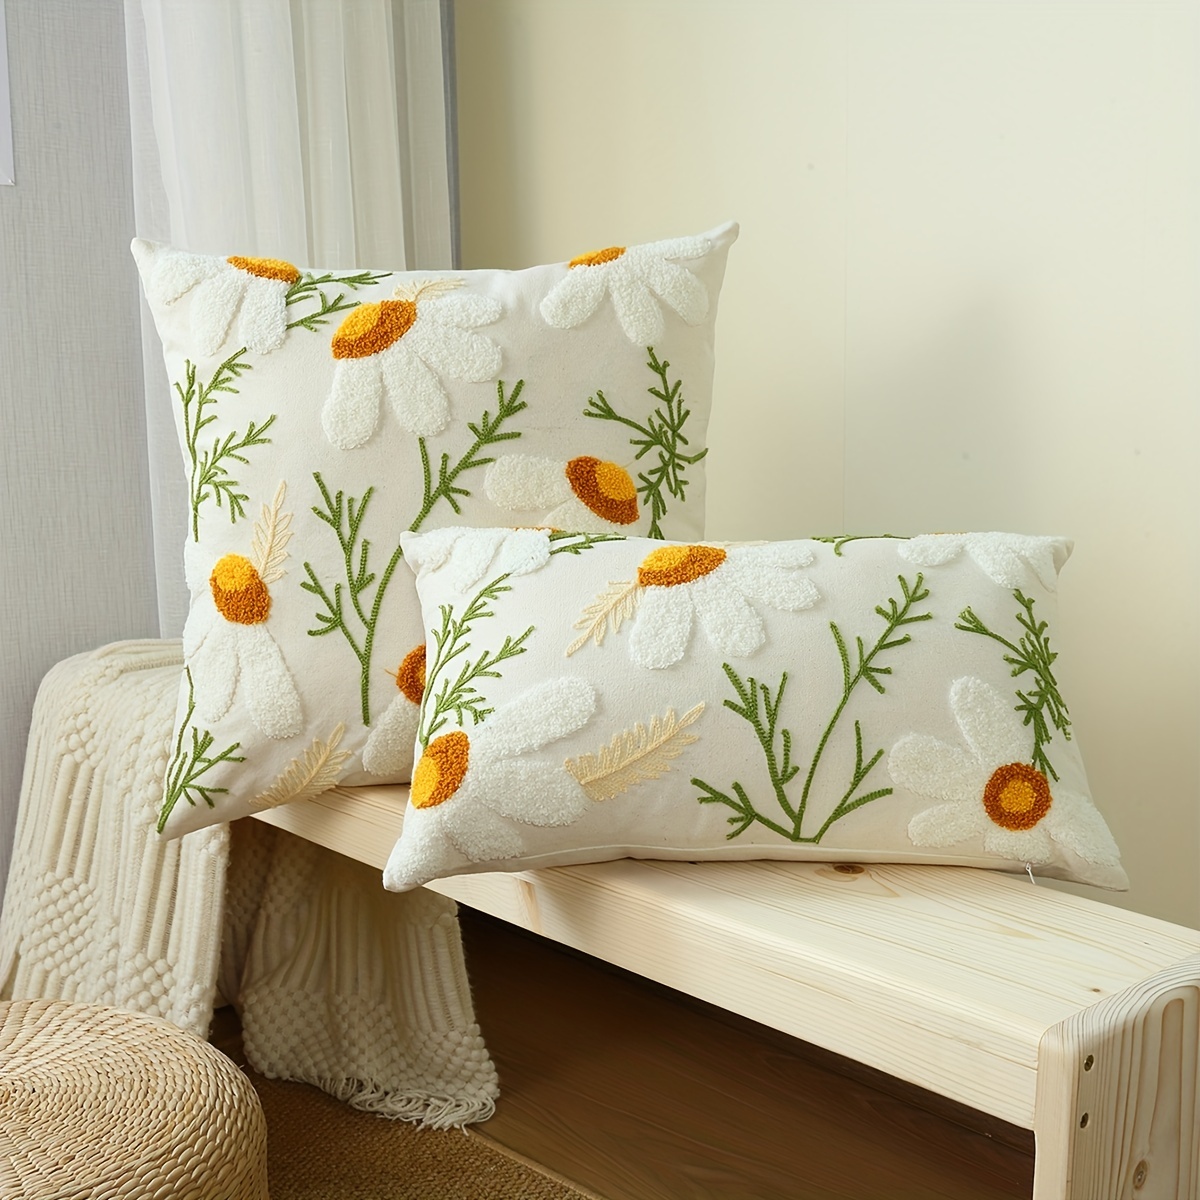 Tufted Embroidered Cushion Cover Boho Pillow Decorative Throw